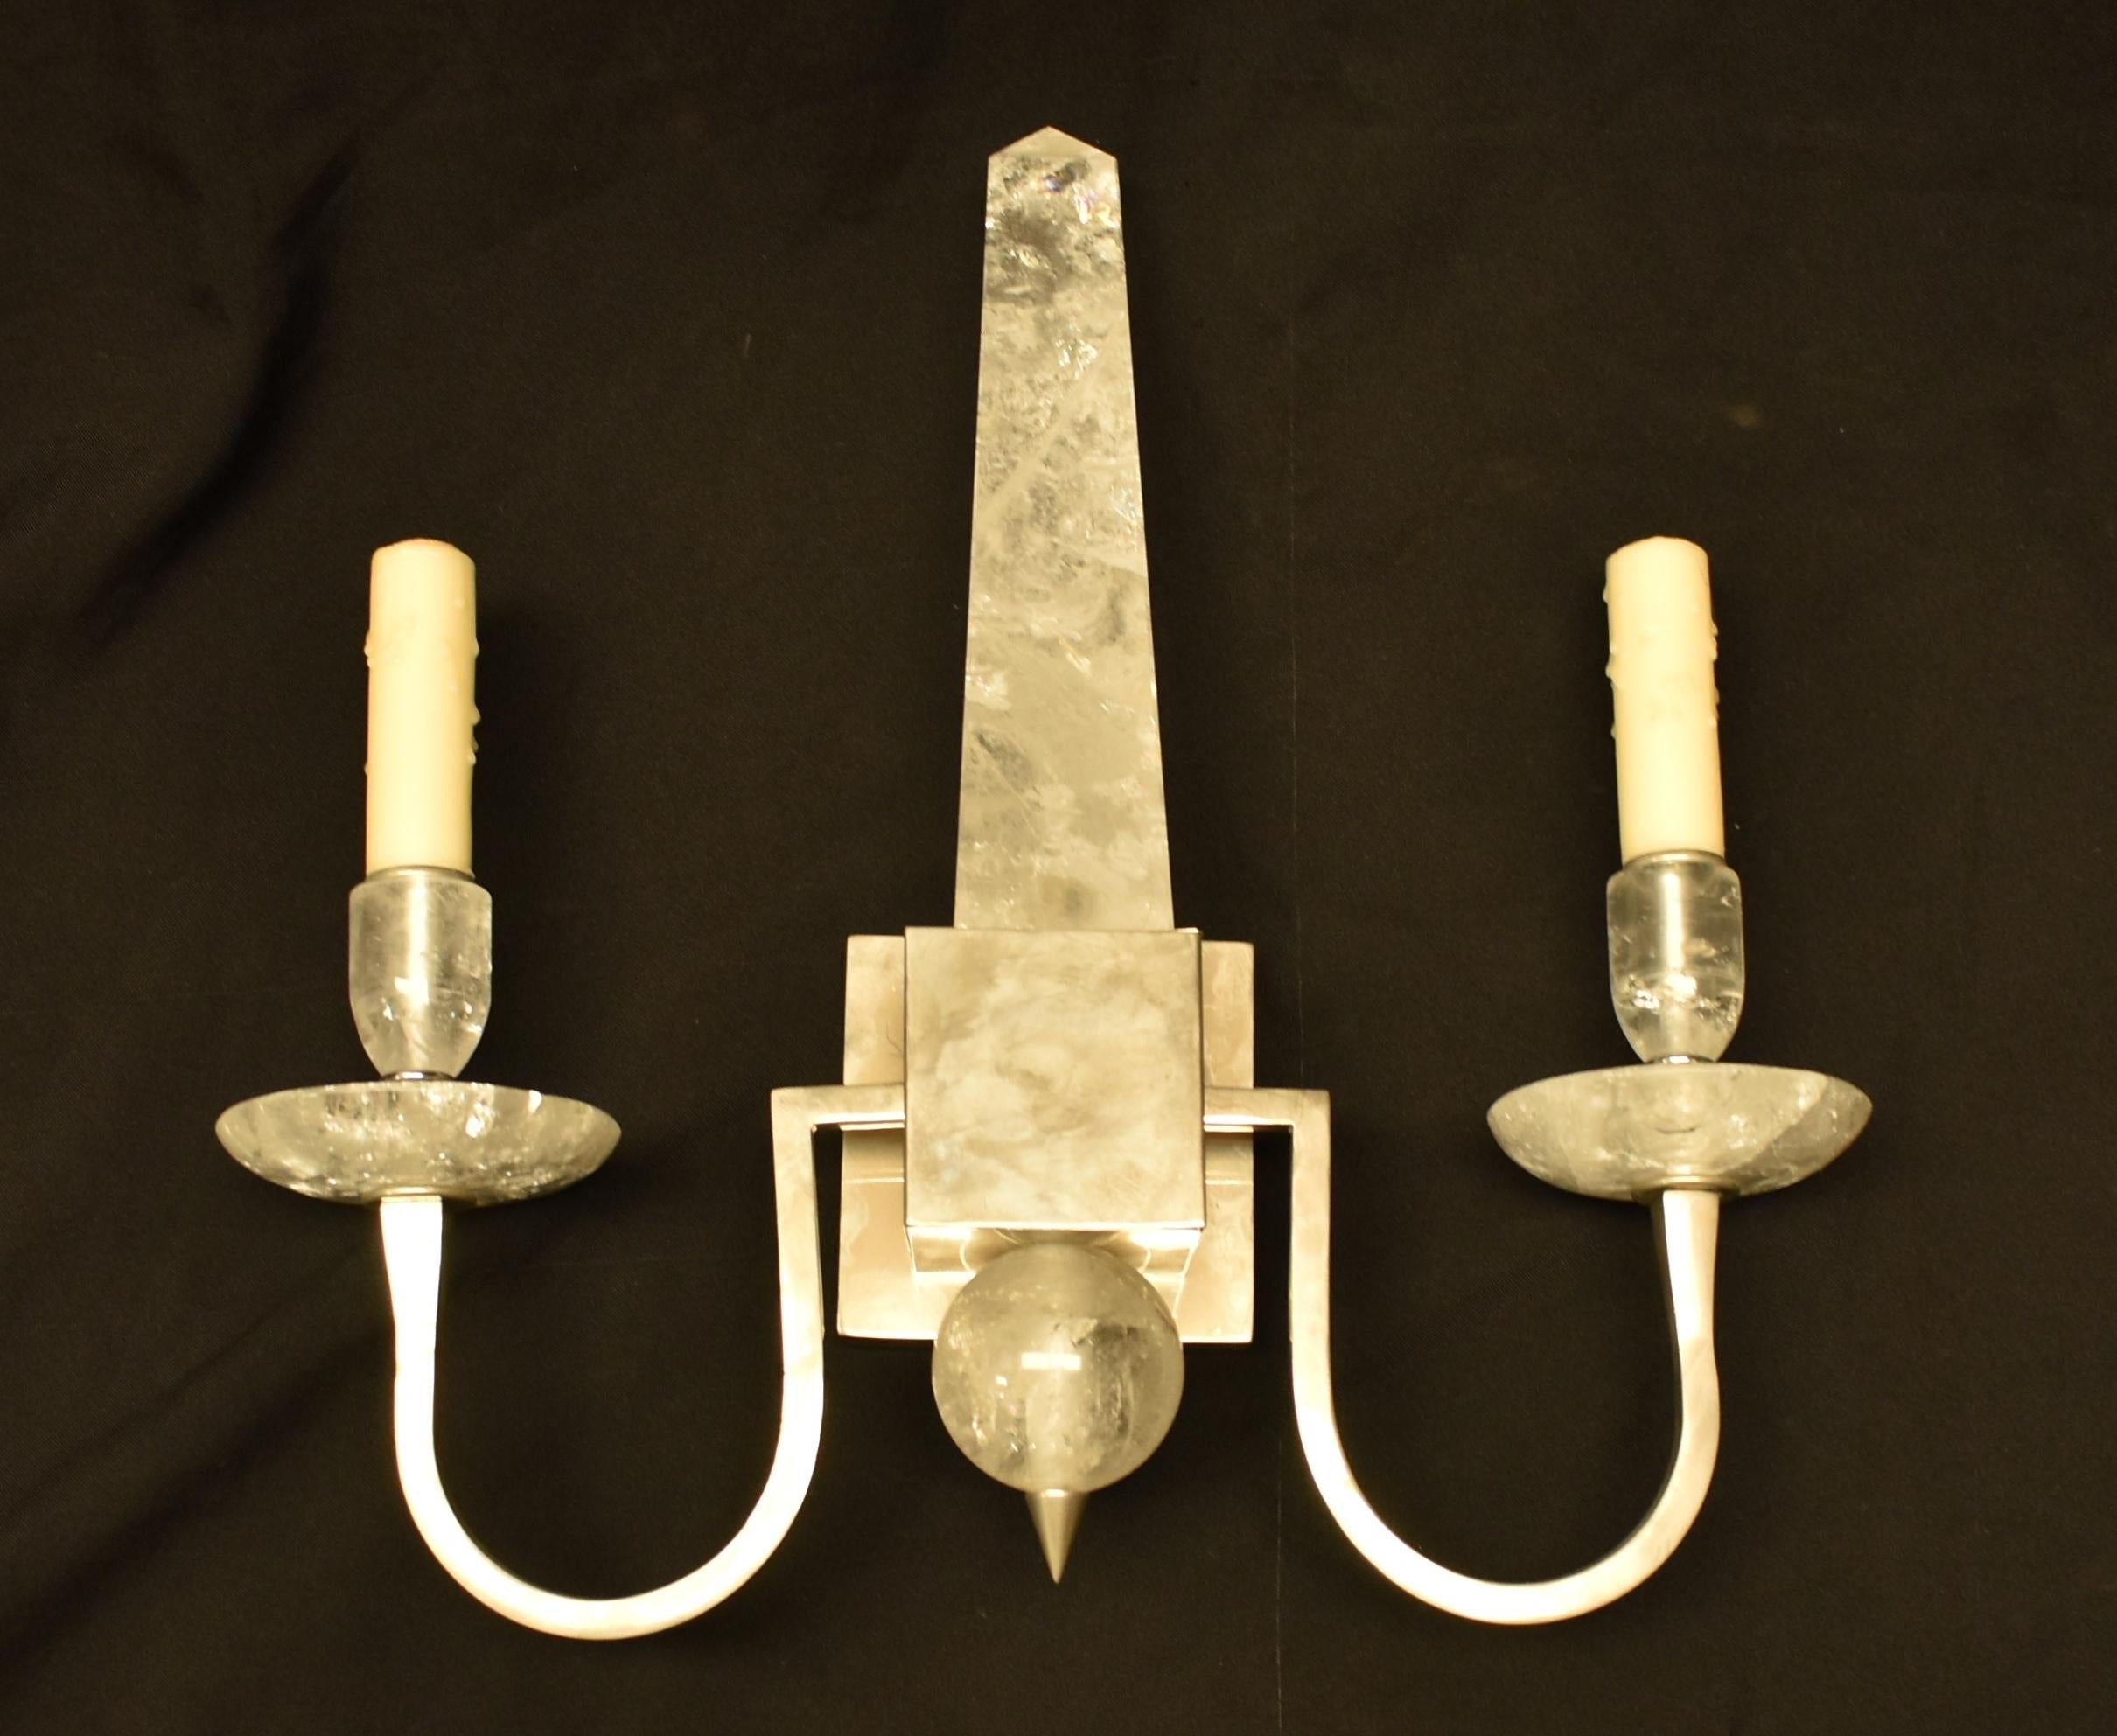 Pair of Modern Style Rock Crystal Obelisk Sconces In New Condition For Sale In Cypress, CA